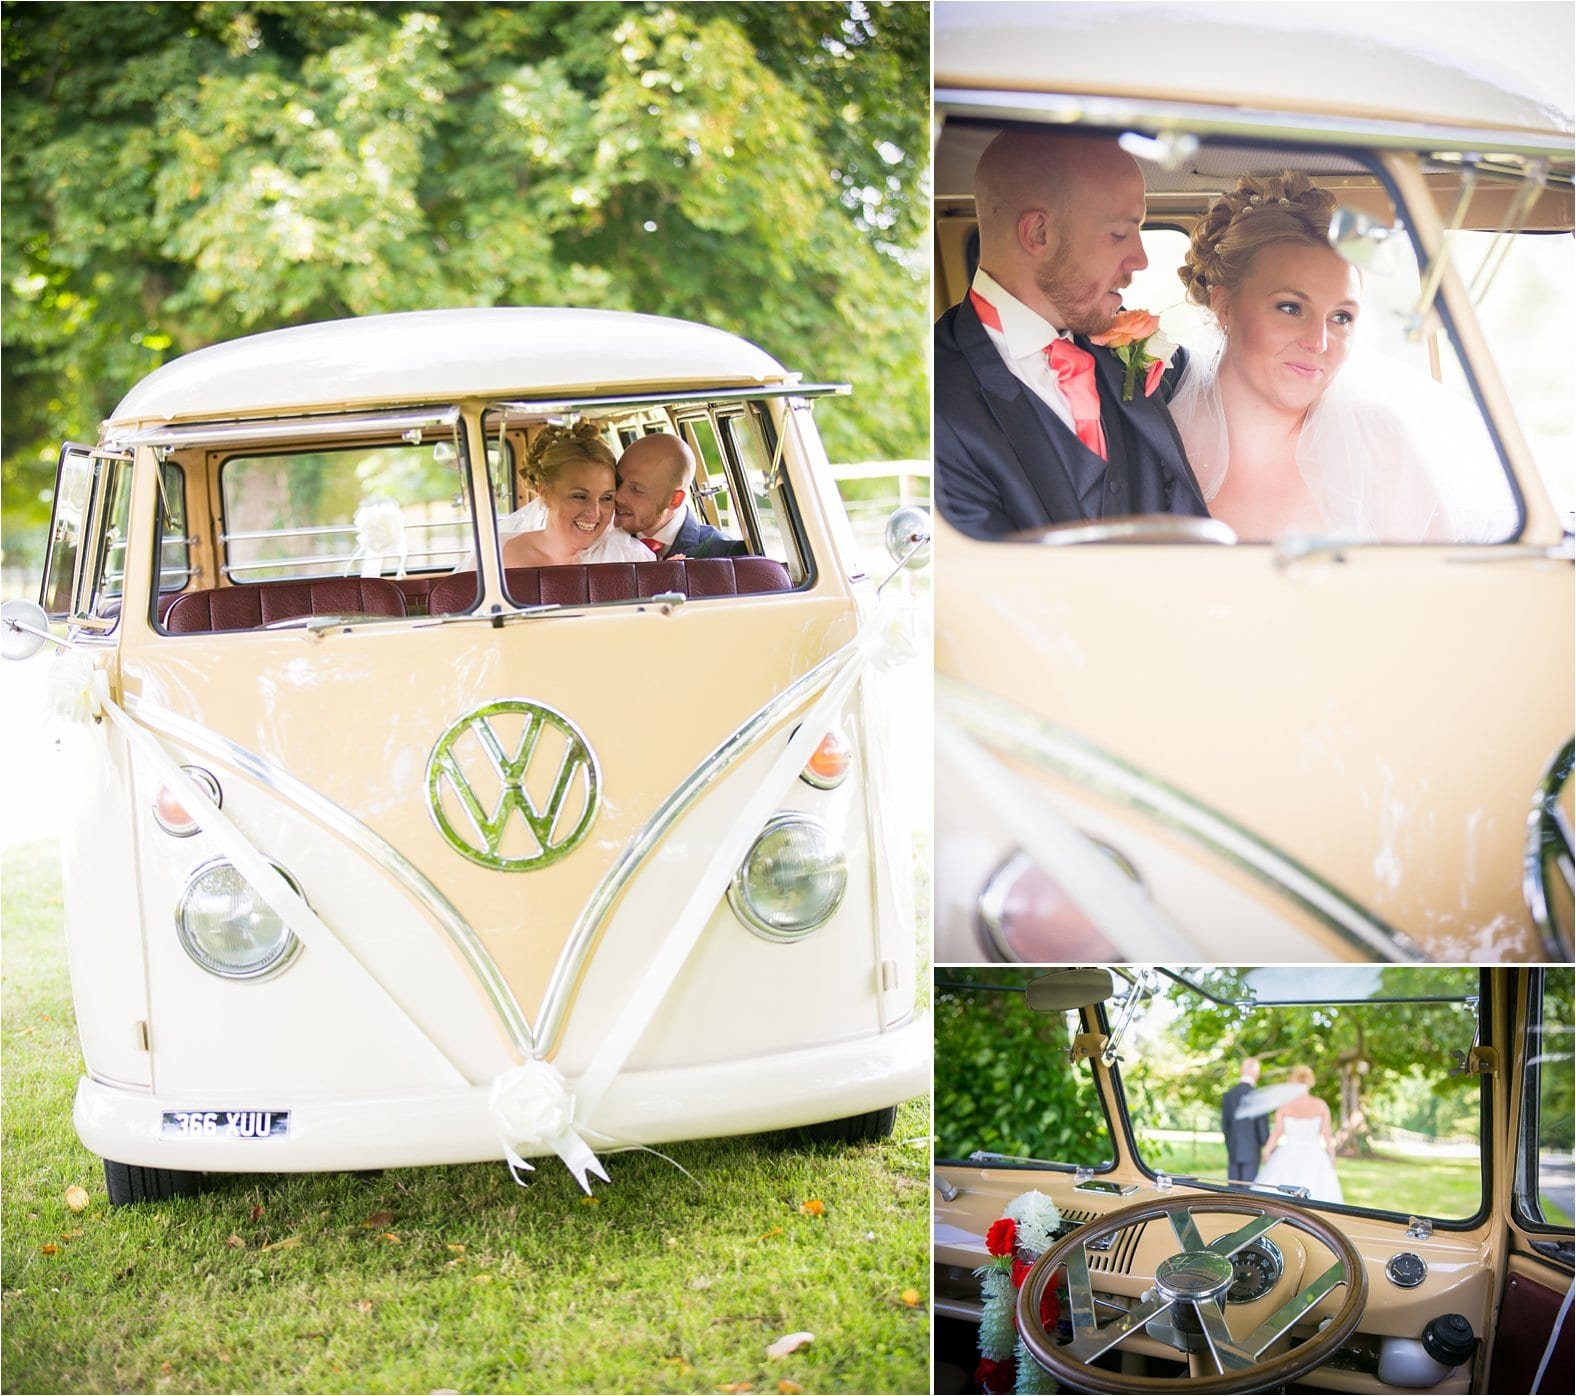 Devon weddings by Younger photography